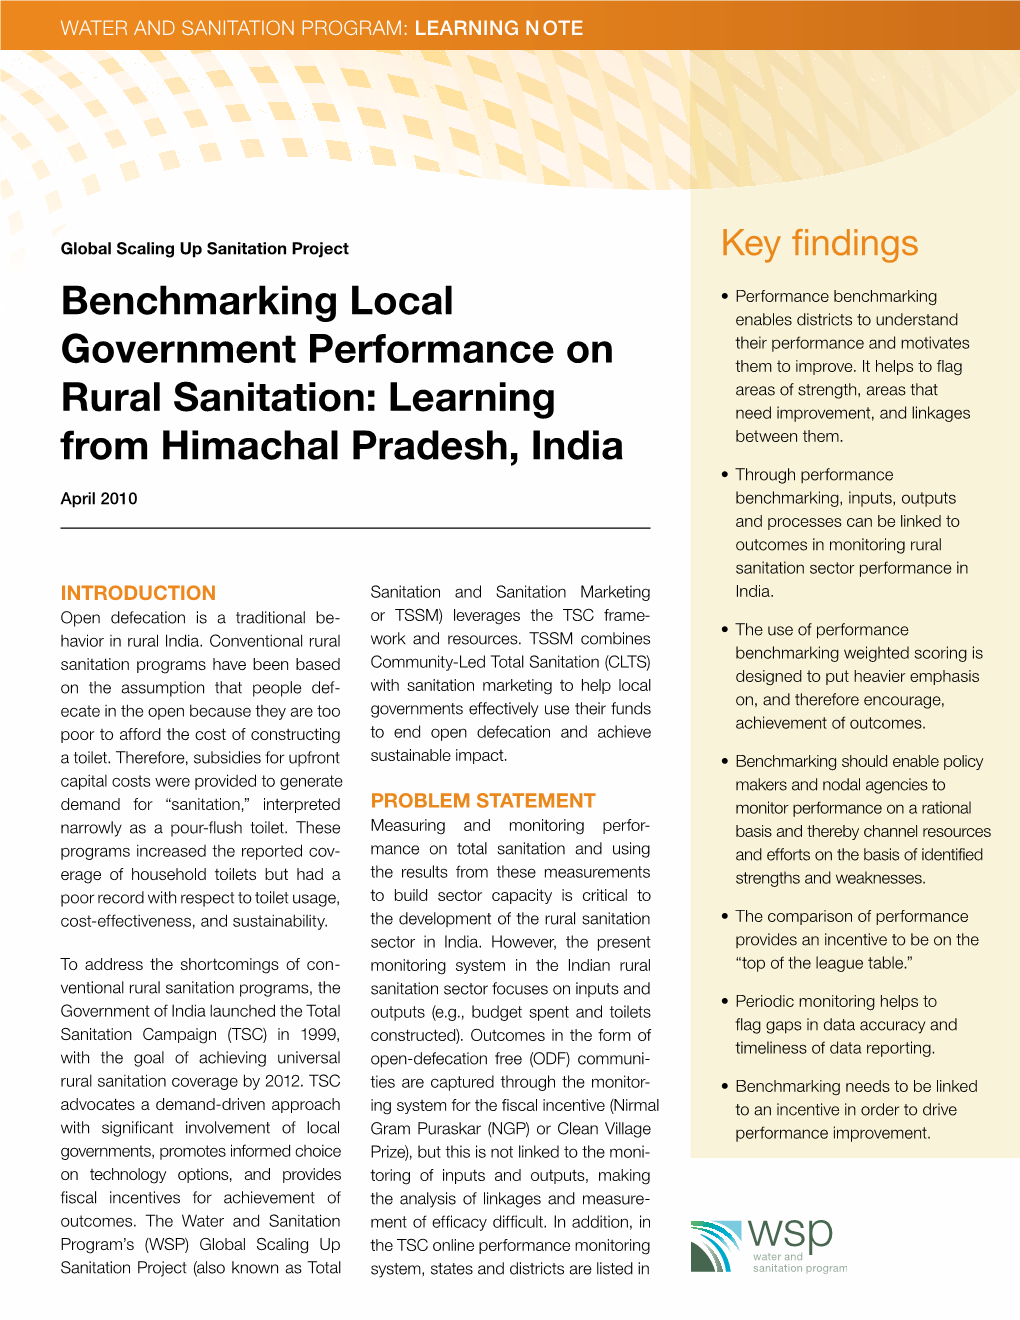 Benchmarking Local Government Performance on Rural Sanitation Global Scaling up Sanitation Project